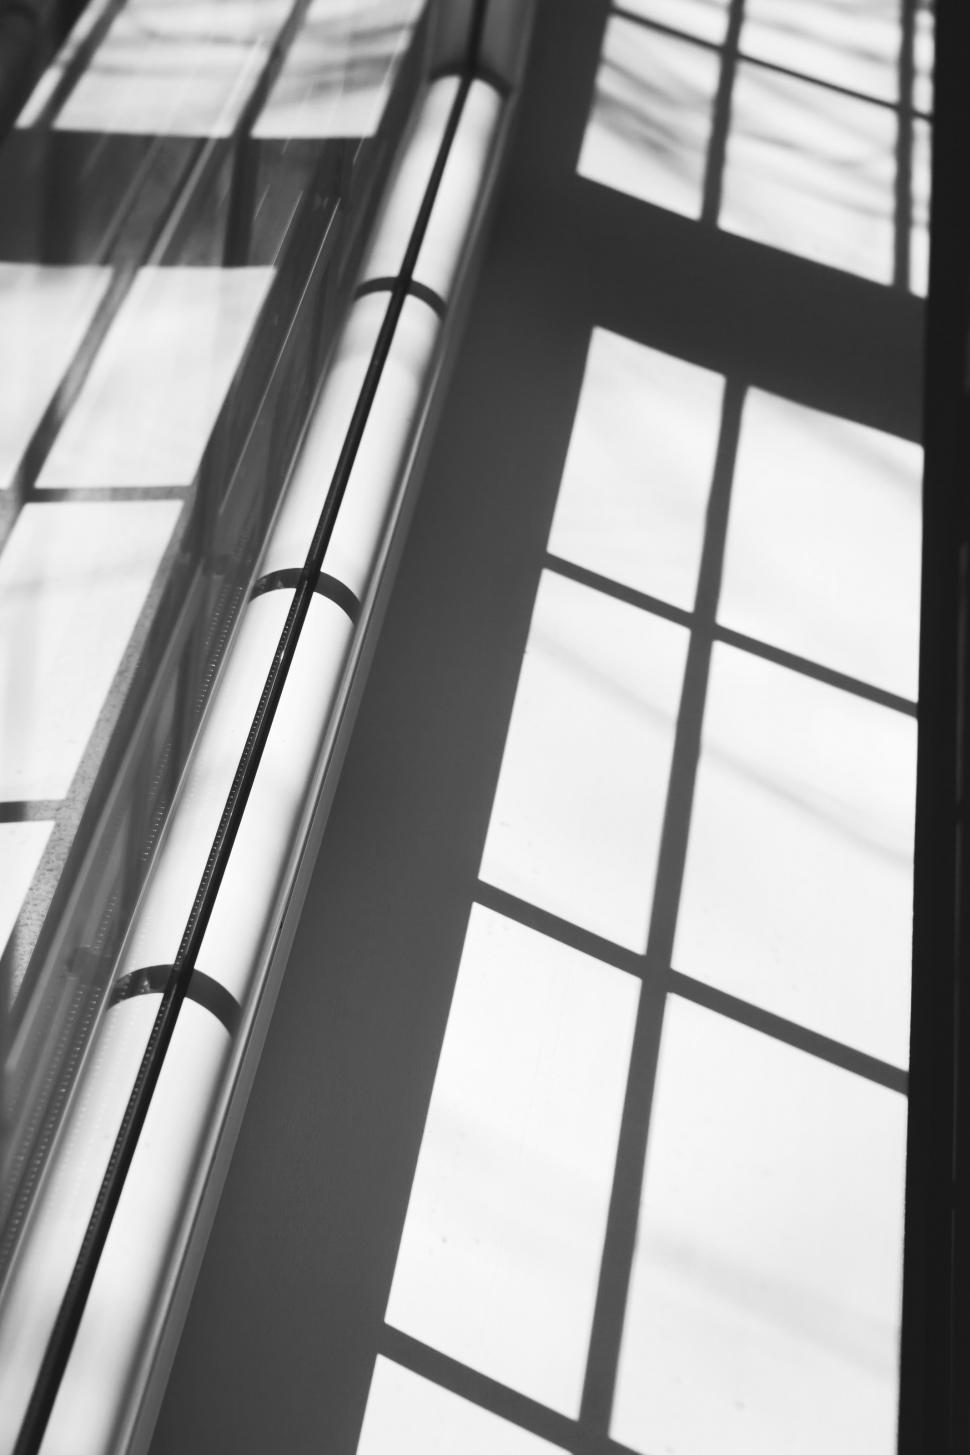 Free Image of Windows and Blinds in Monochrome 